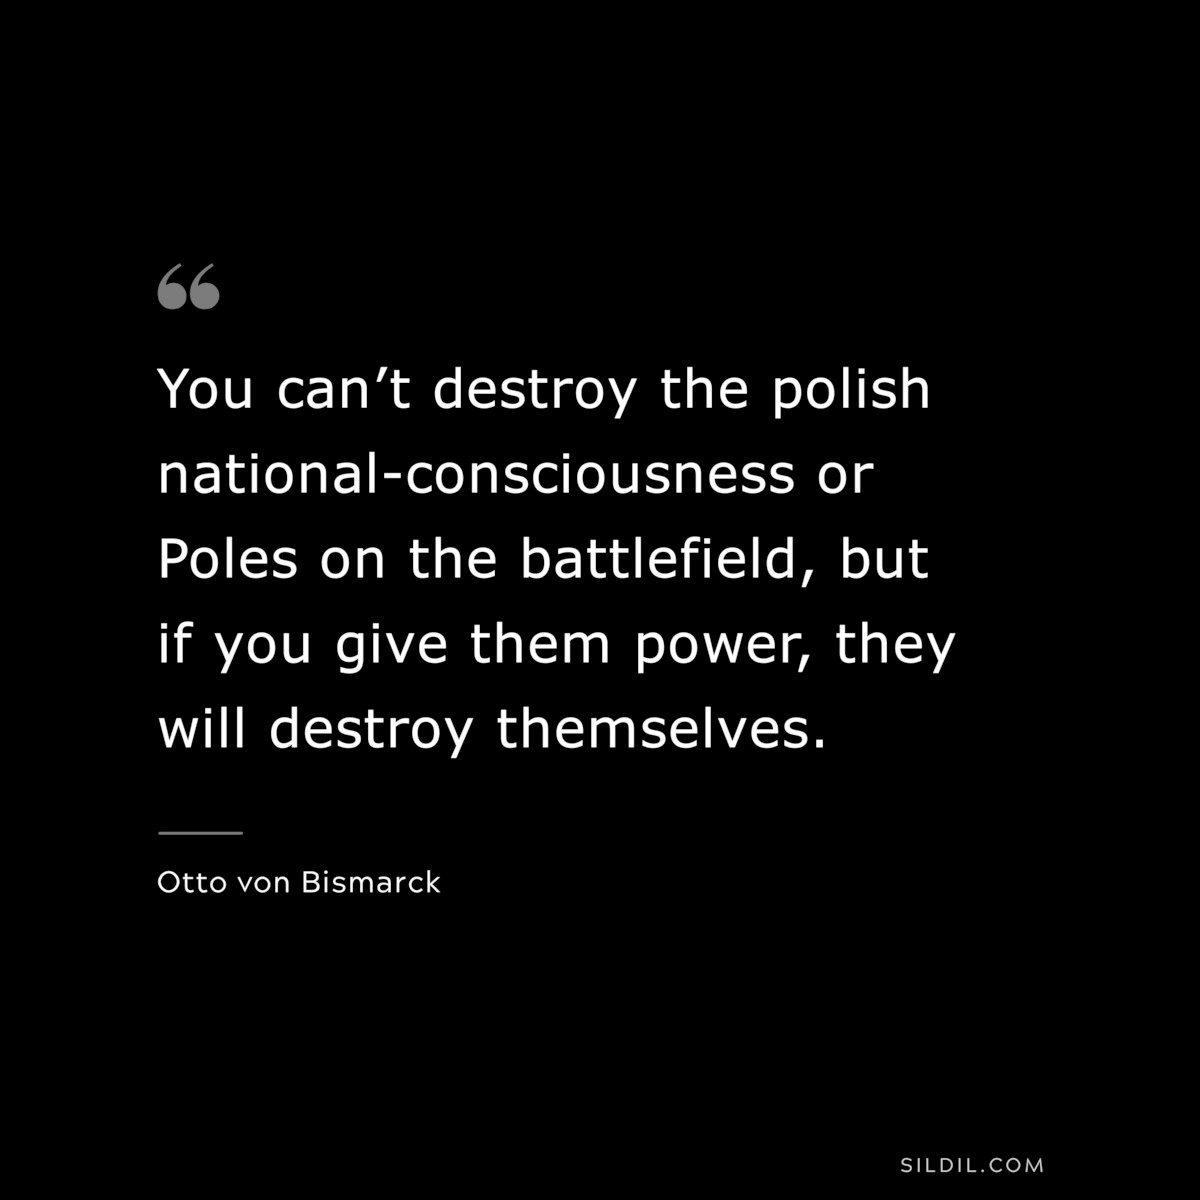 You can’t destroy the polish national-consciousness or Poles on the battlefield, but if you give them power, they will destroy themselves. ― Otto von Bismarck